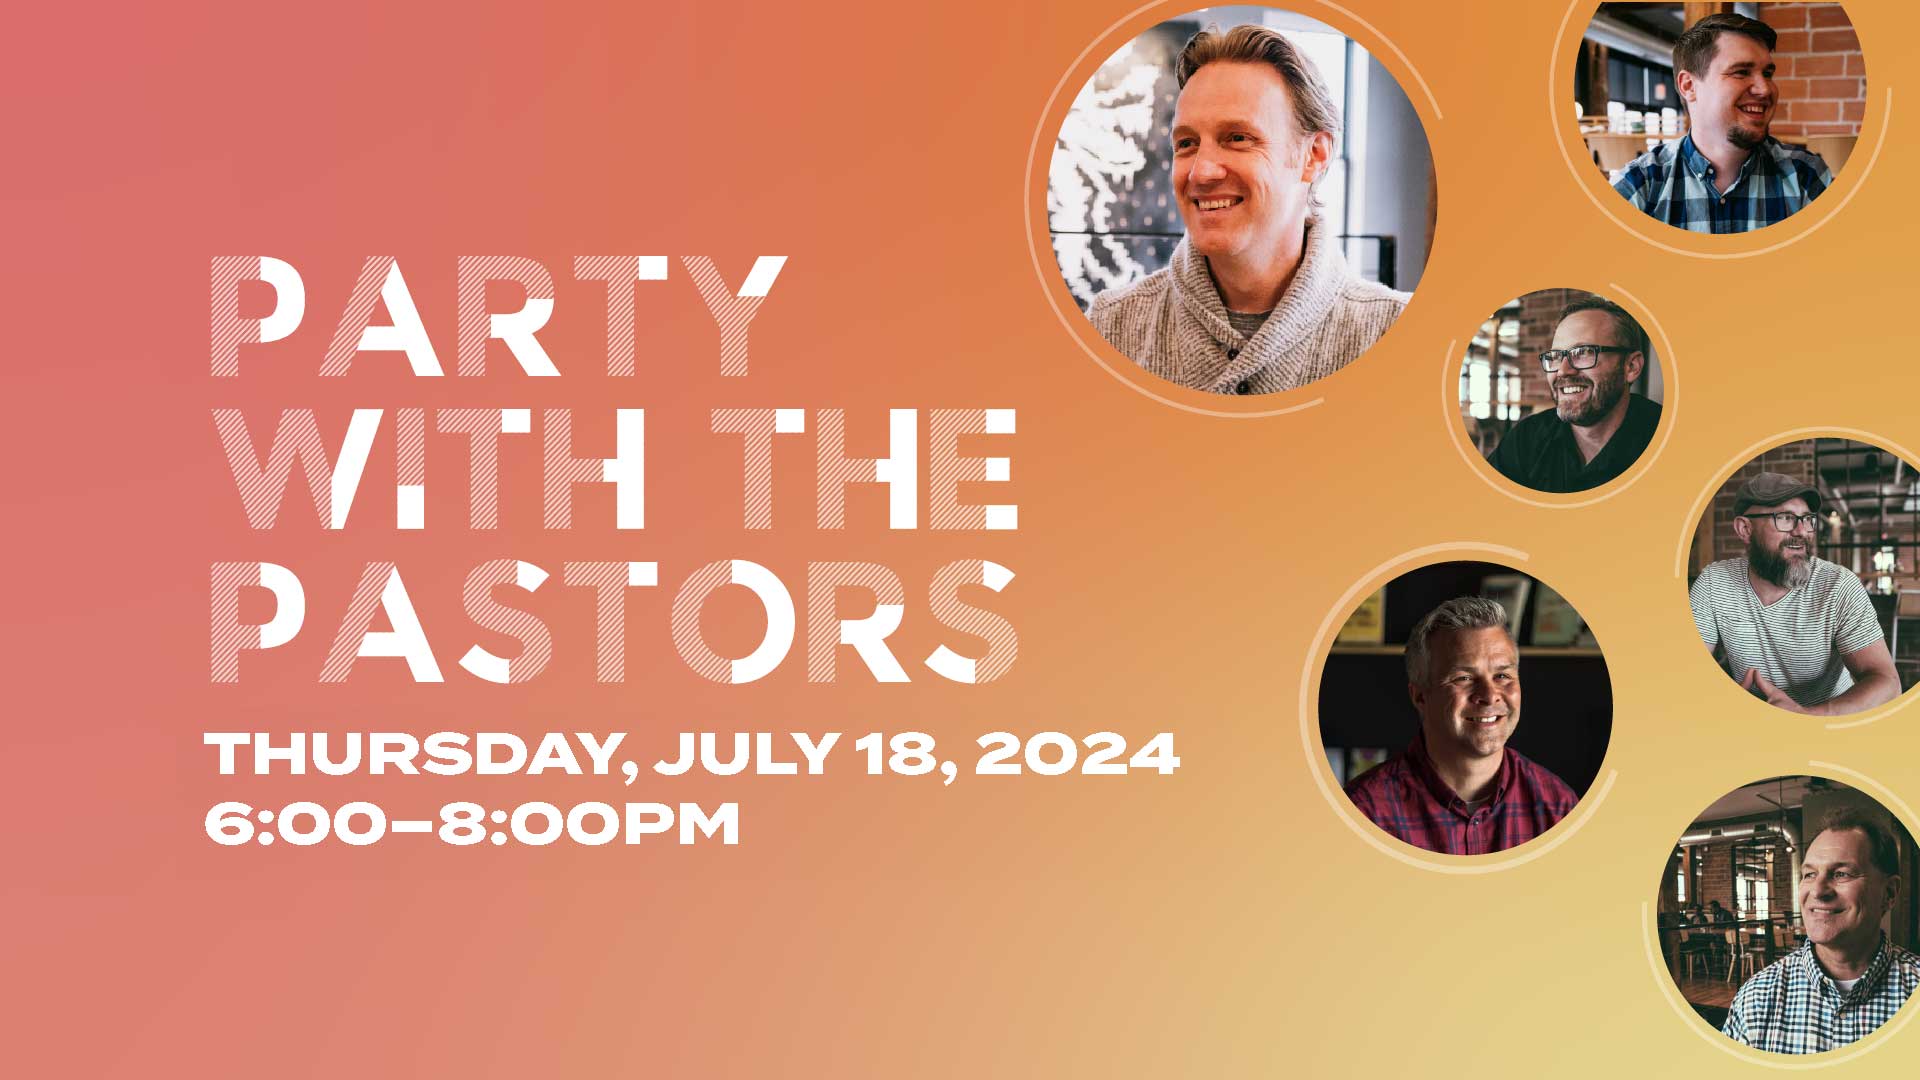 Party with the Pastors